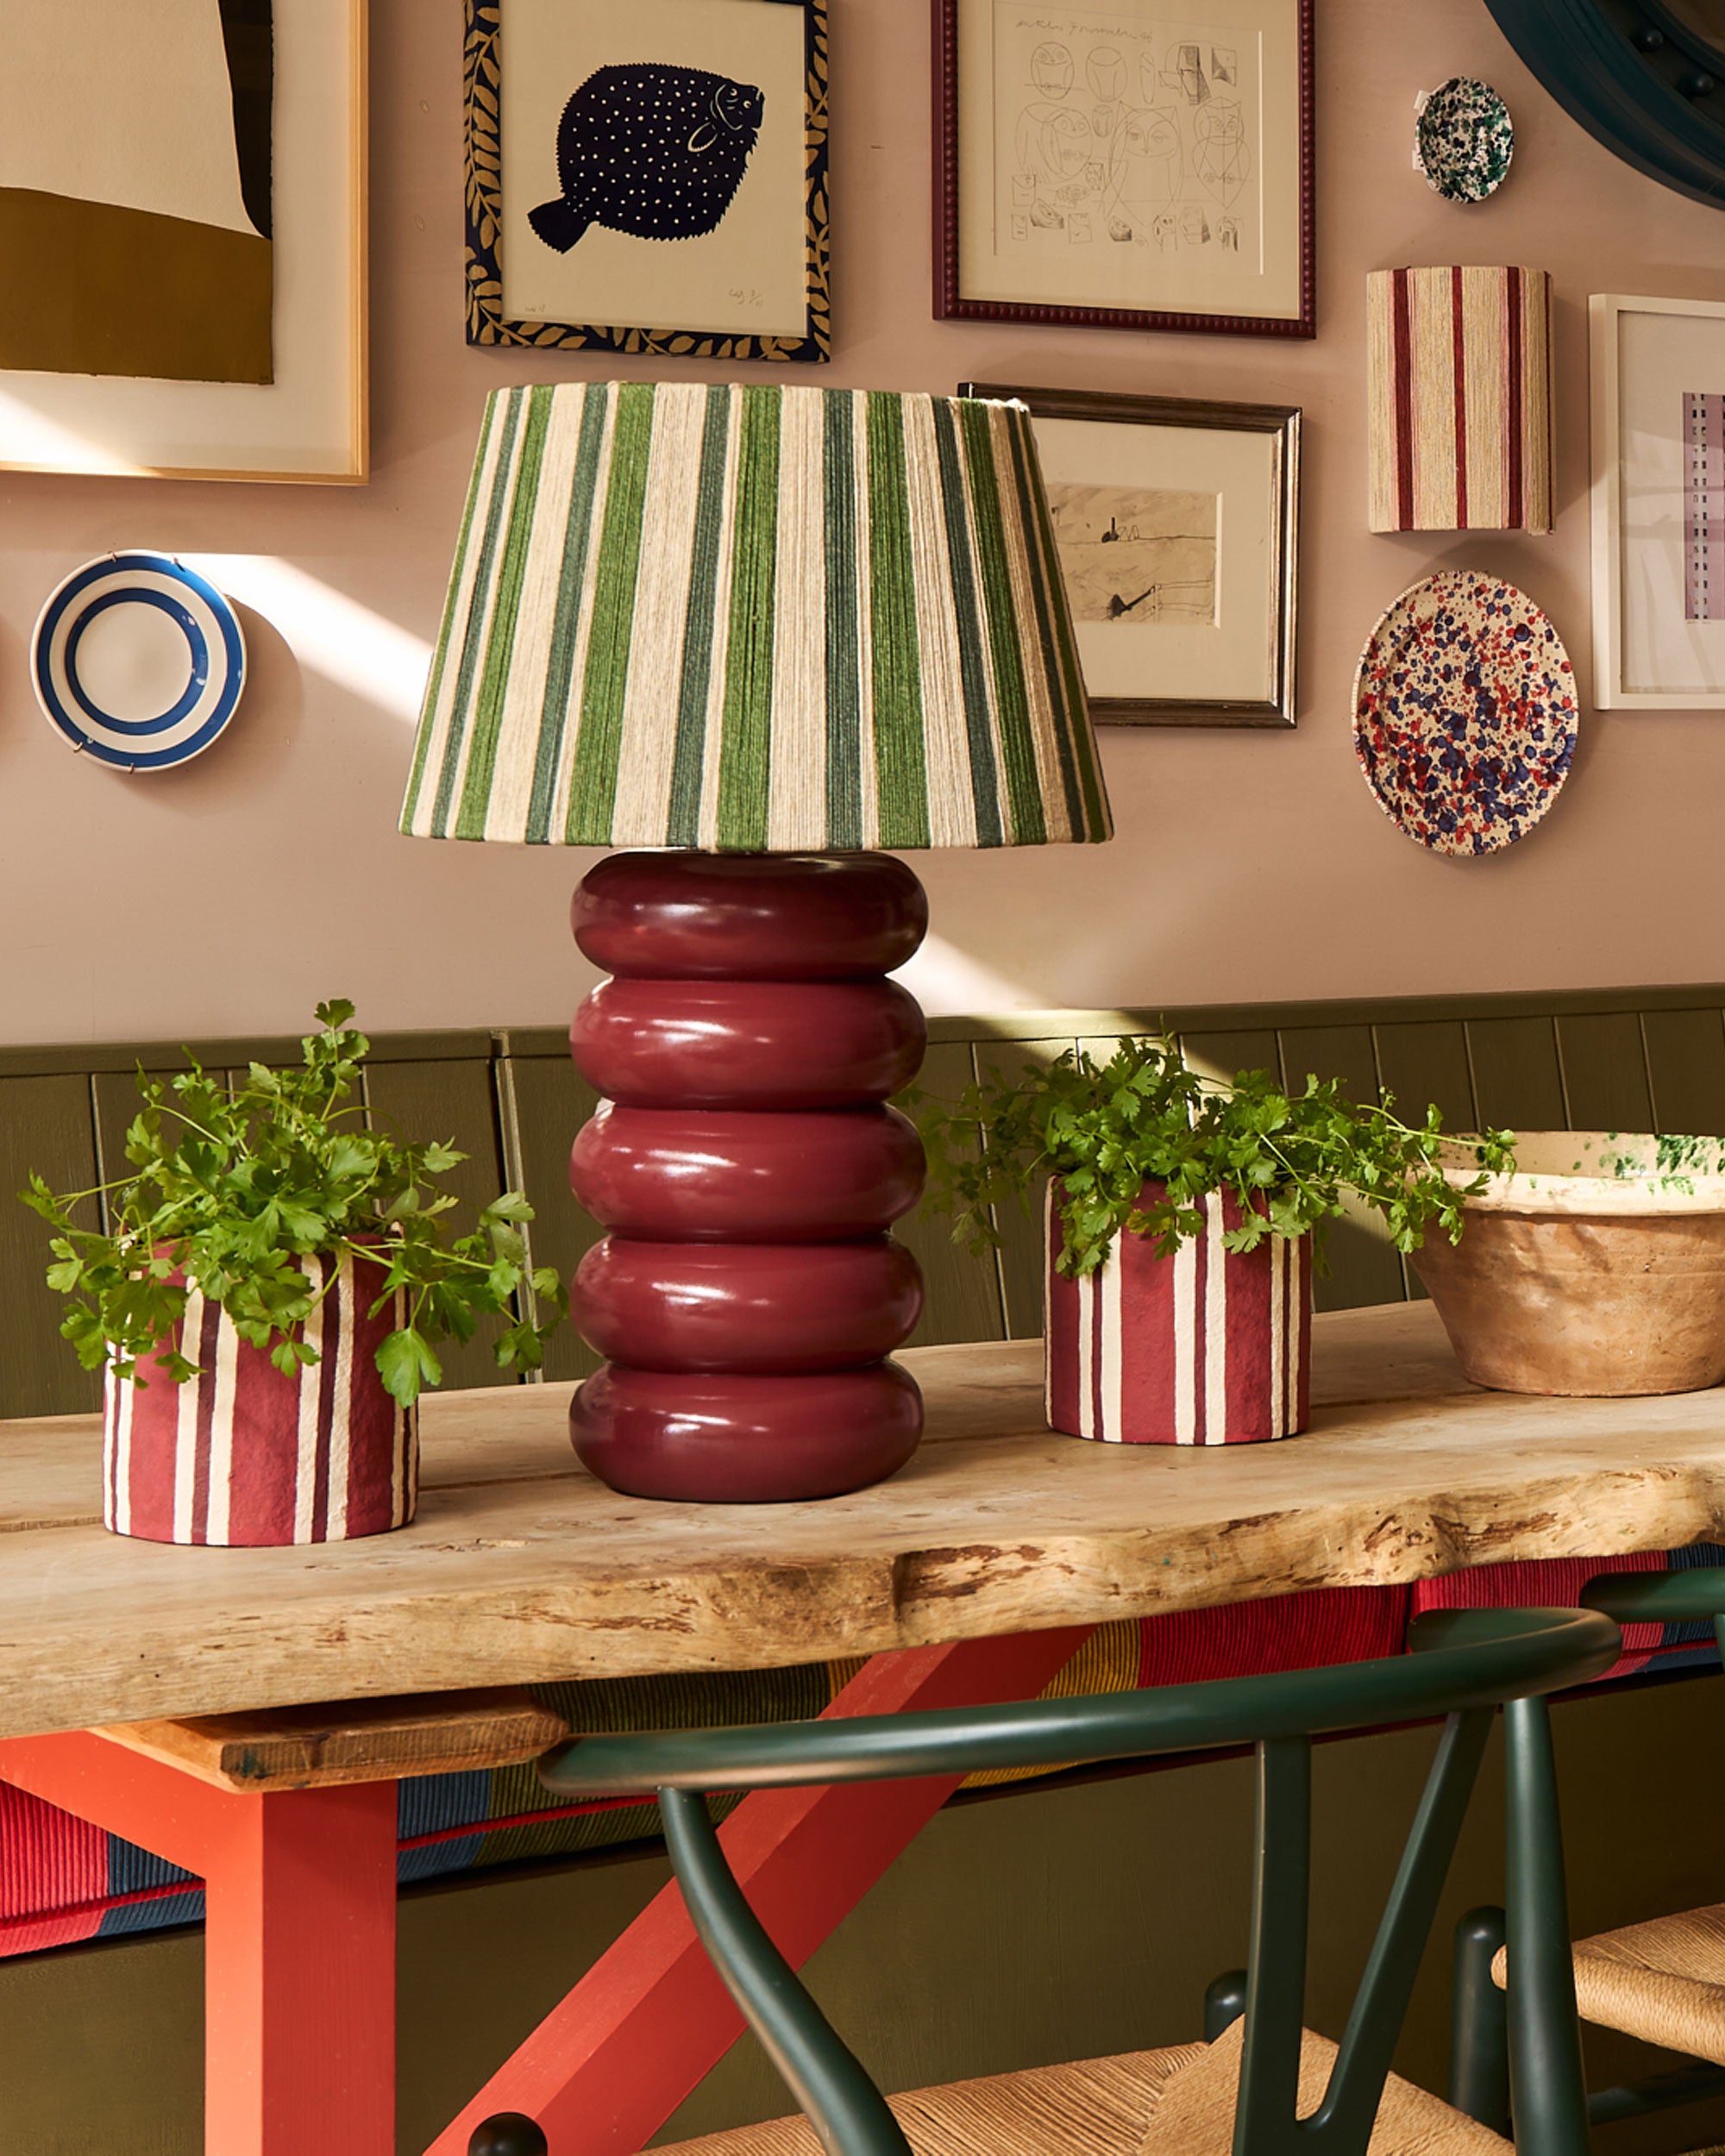 The Stripey String Lampshade - The Green